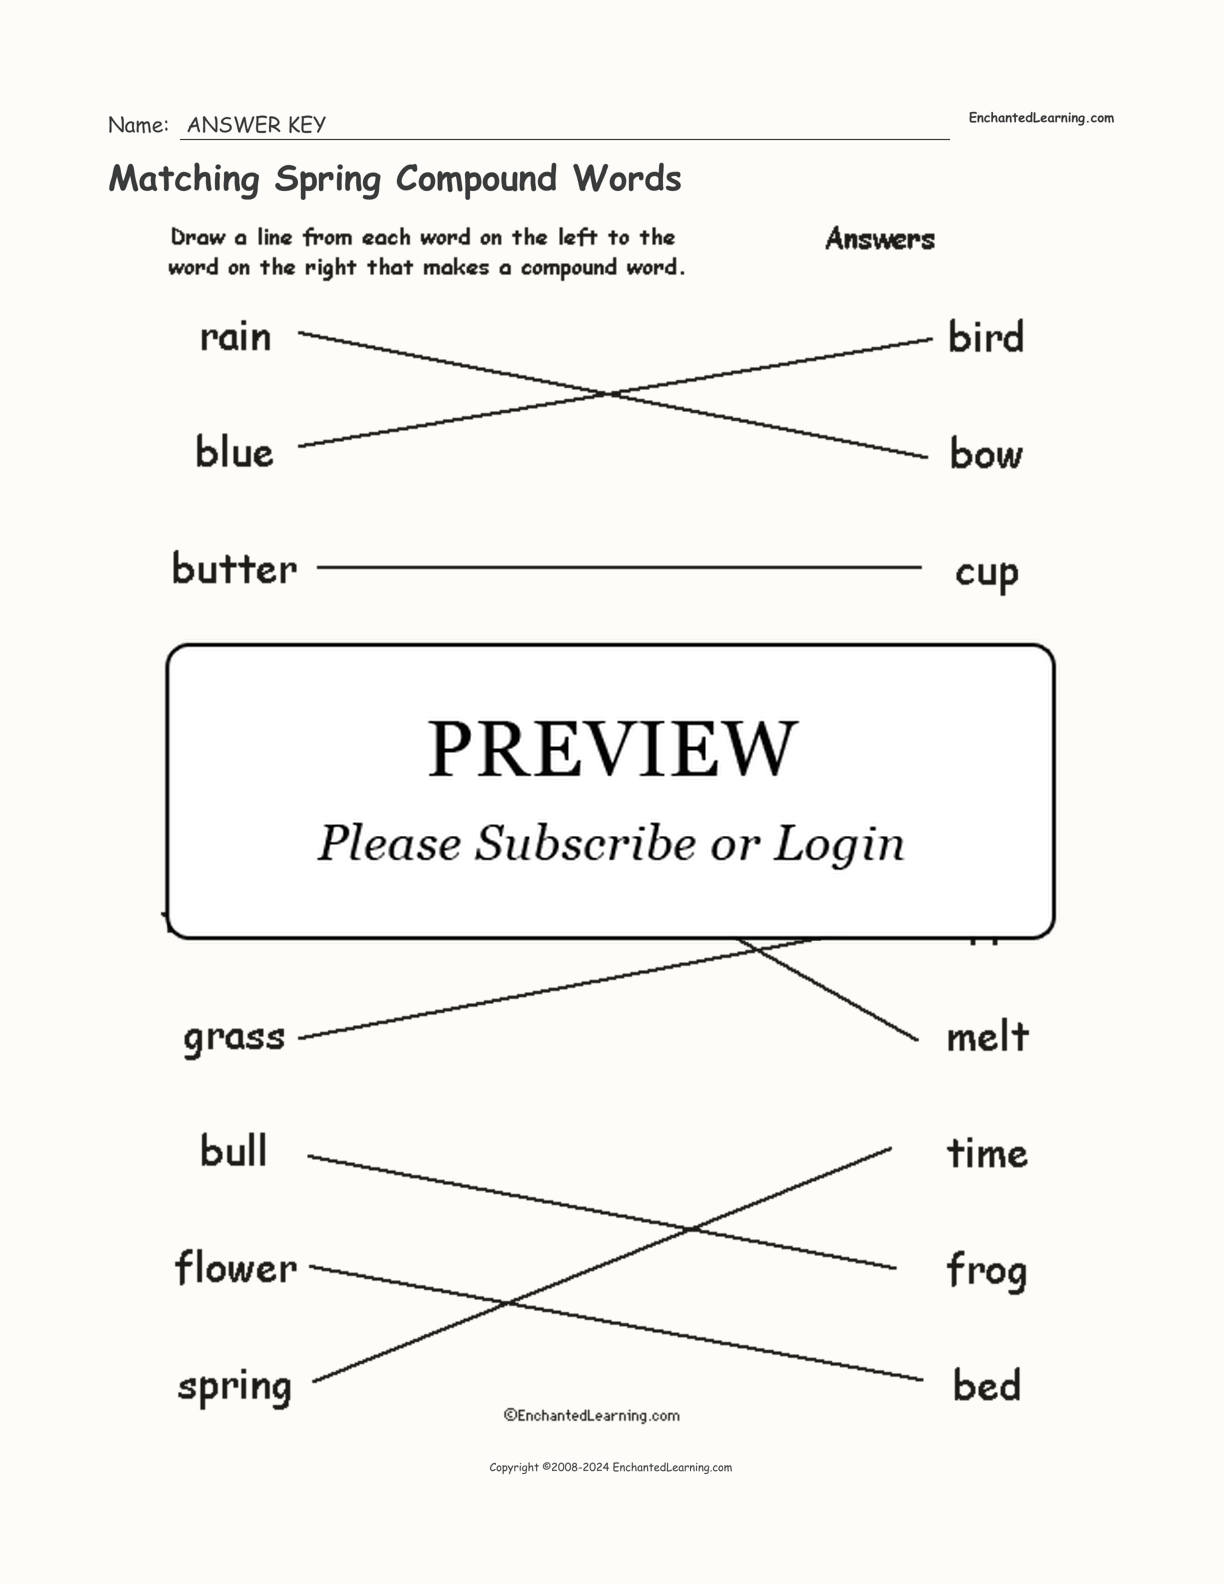 Matching Spring Compound Words interactive worksheet page 2